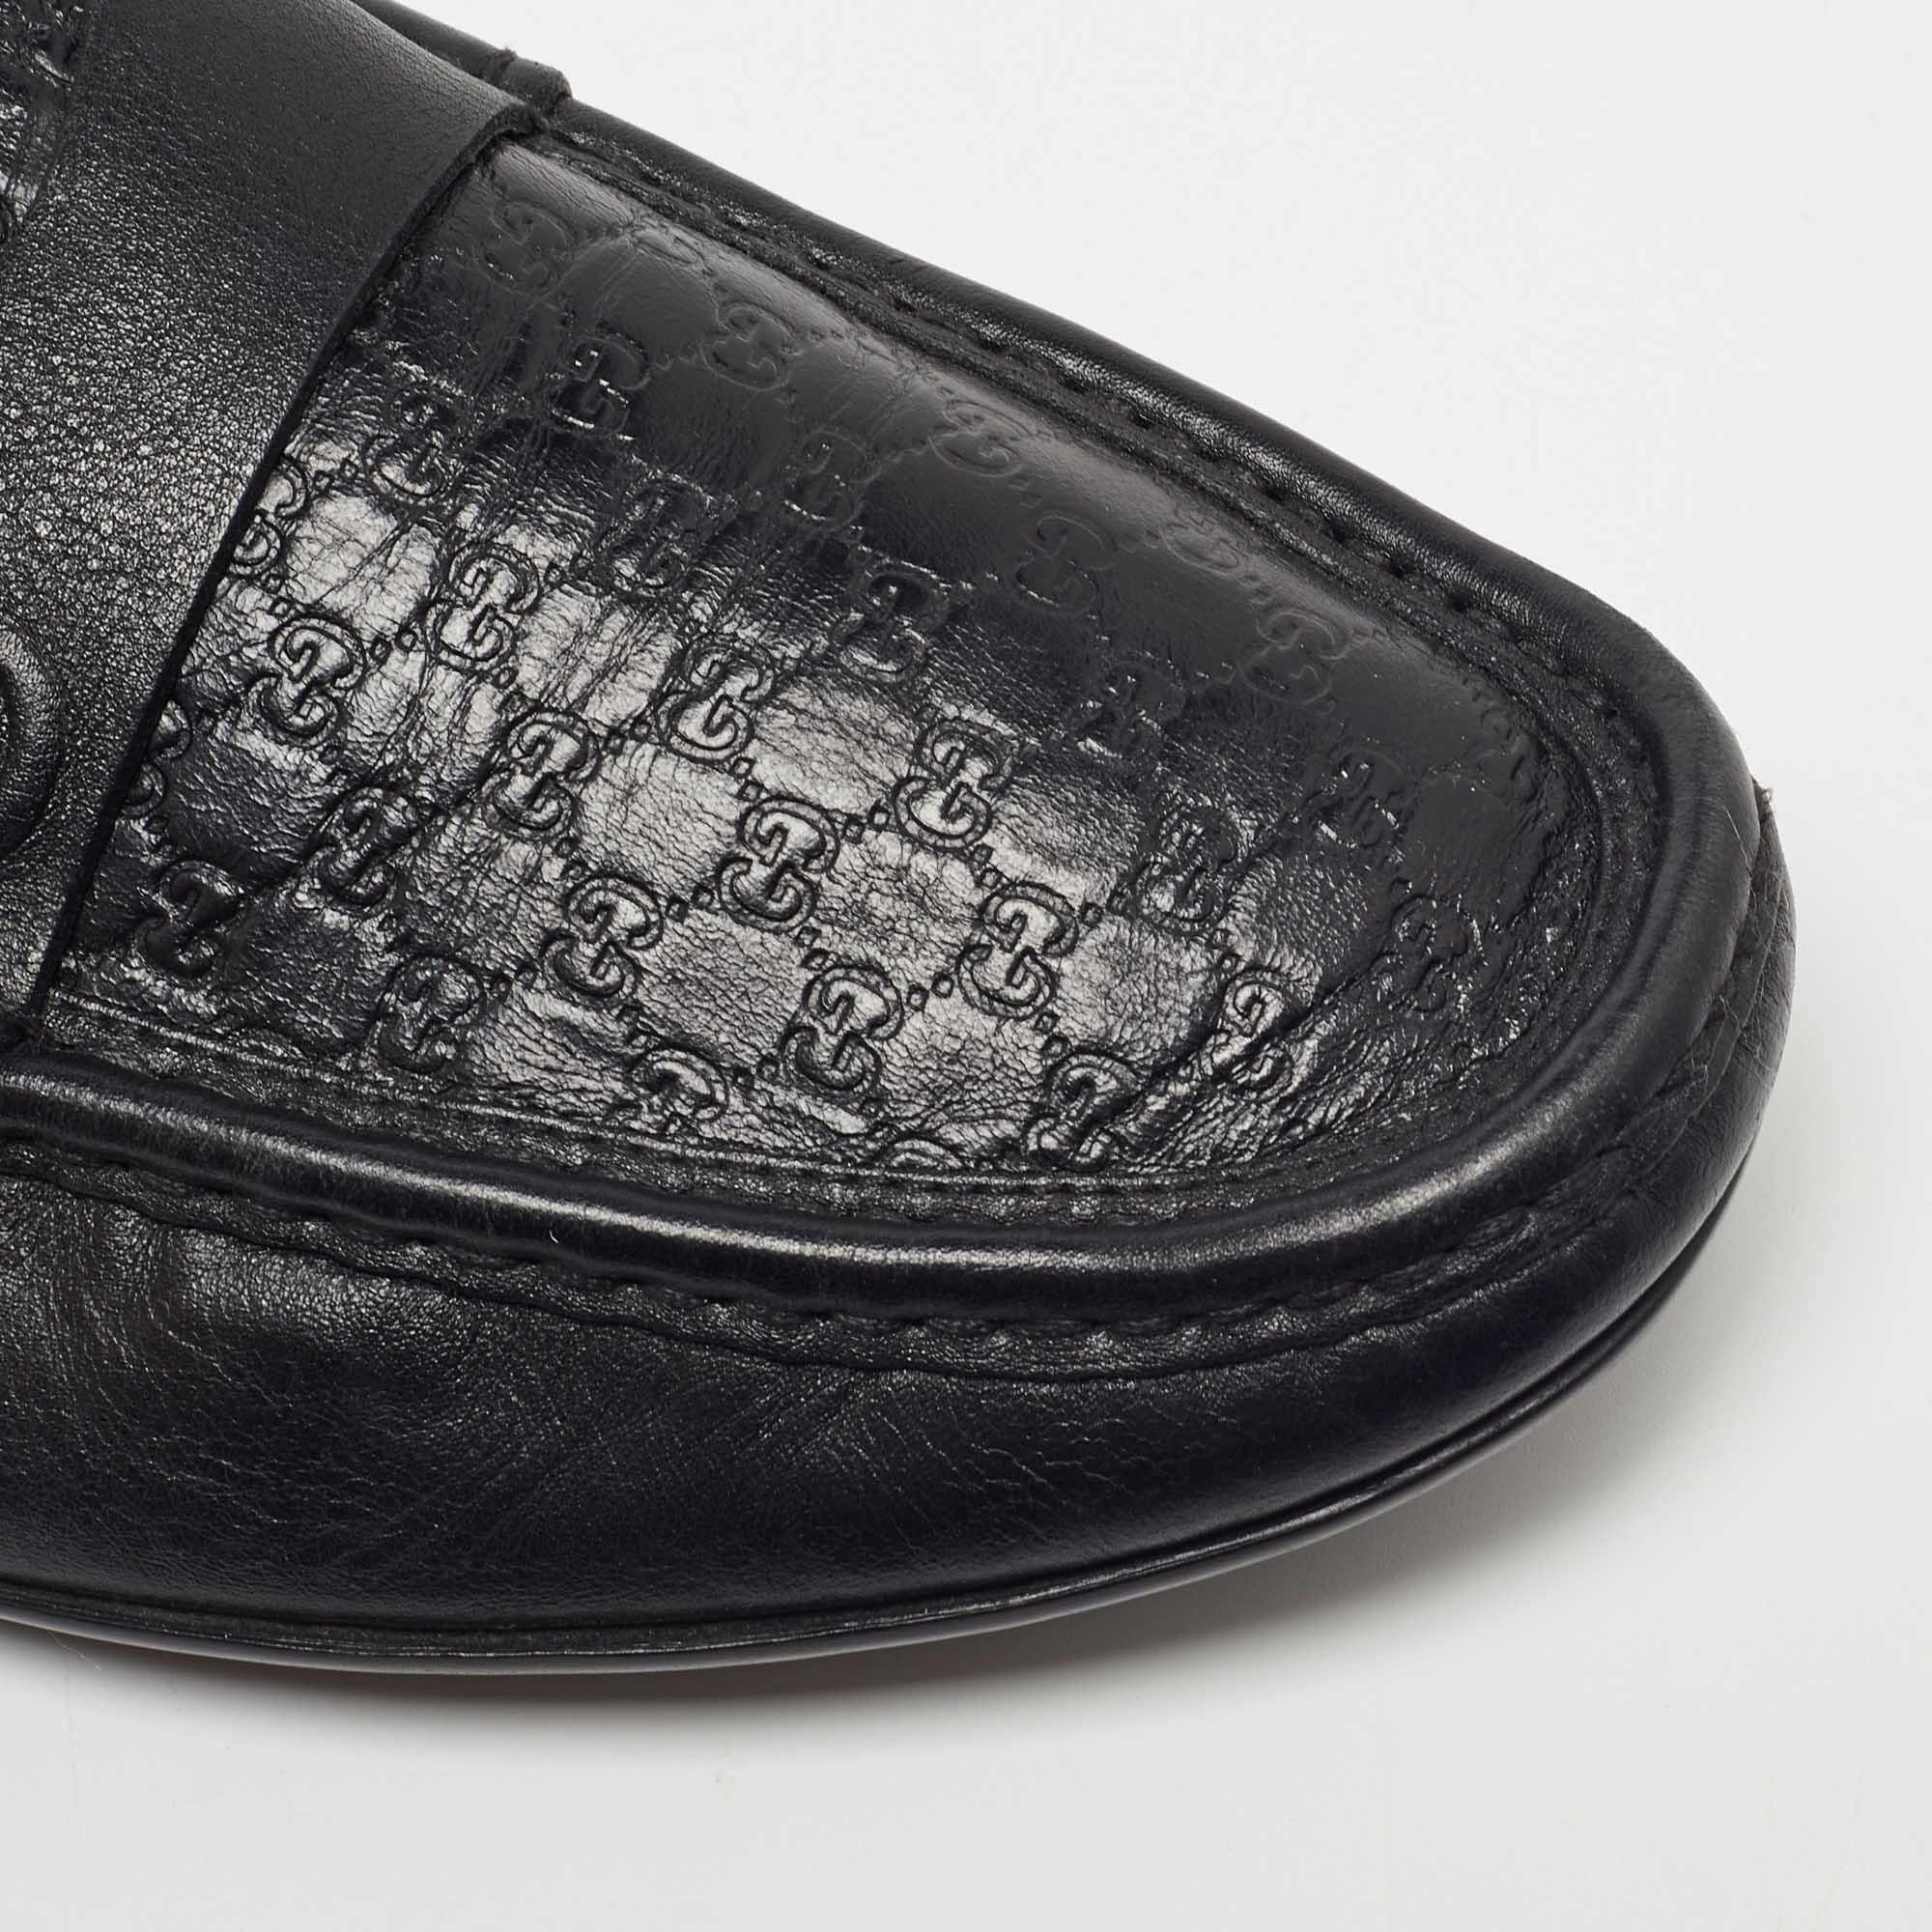 Gucci Black Microguccissima Leather Slip On Loafers Size 40.5 For Sale 2